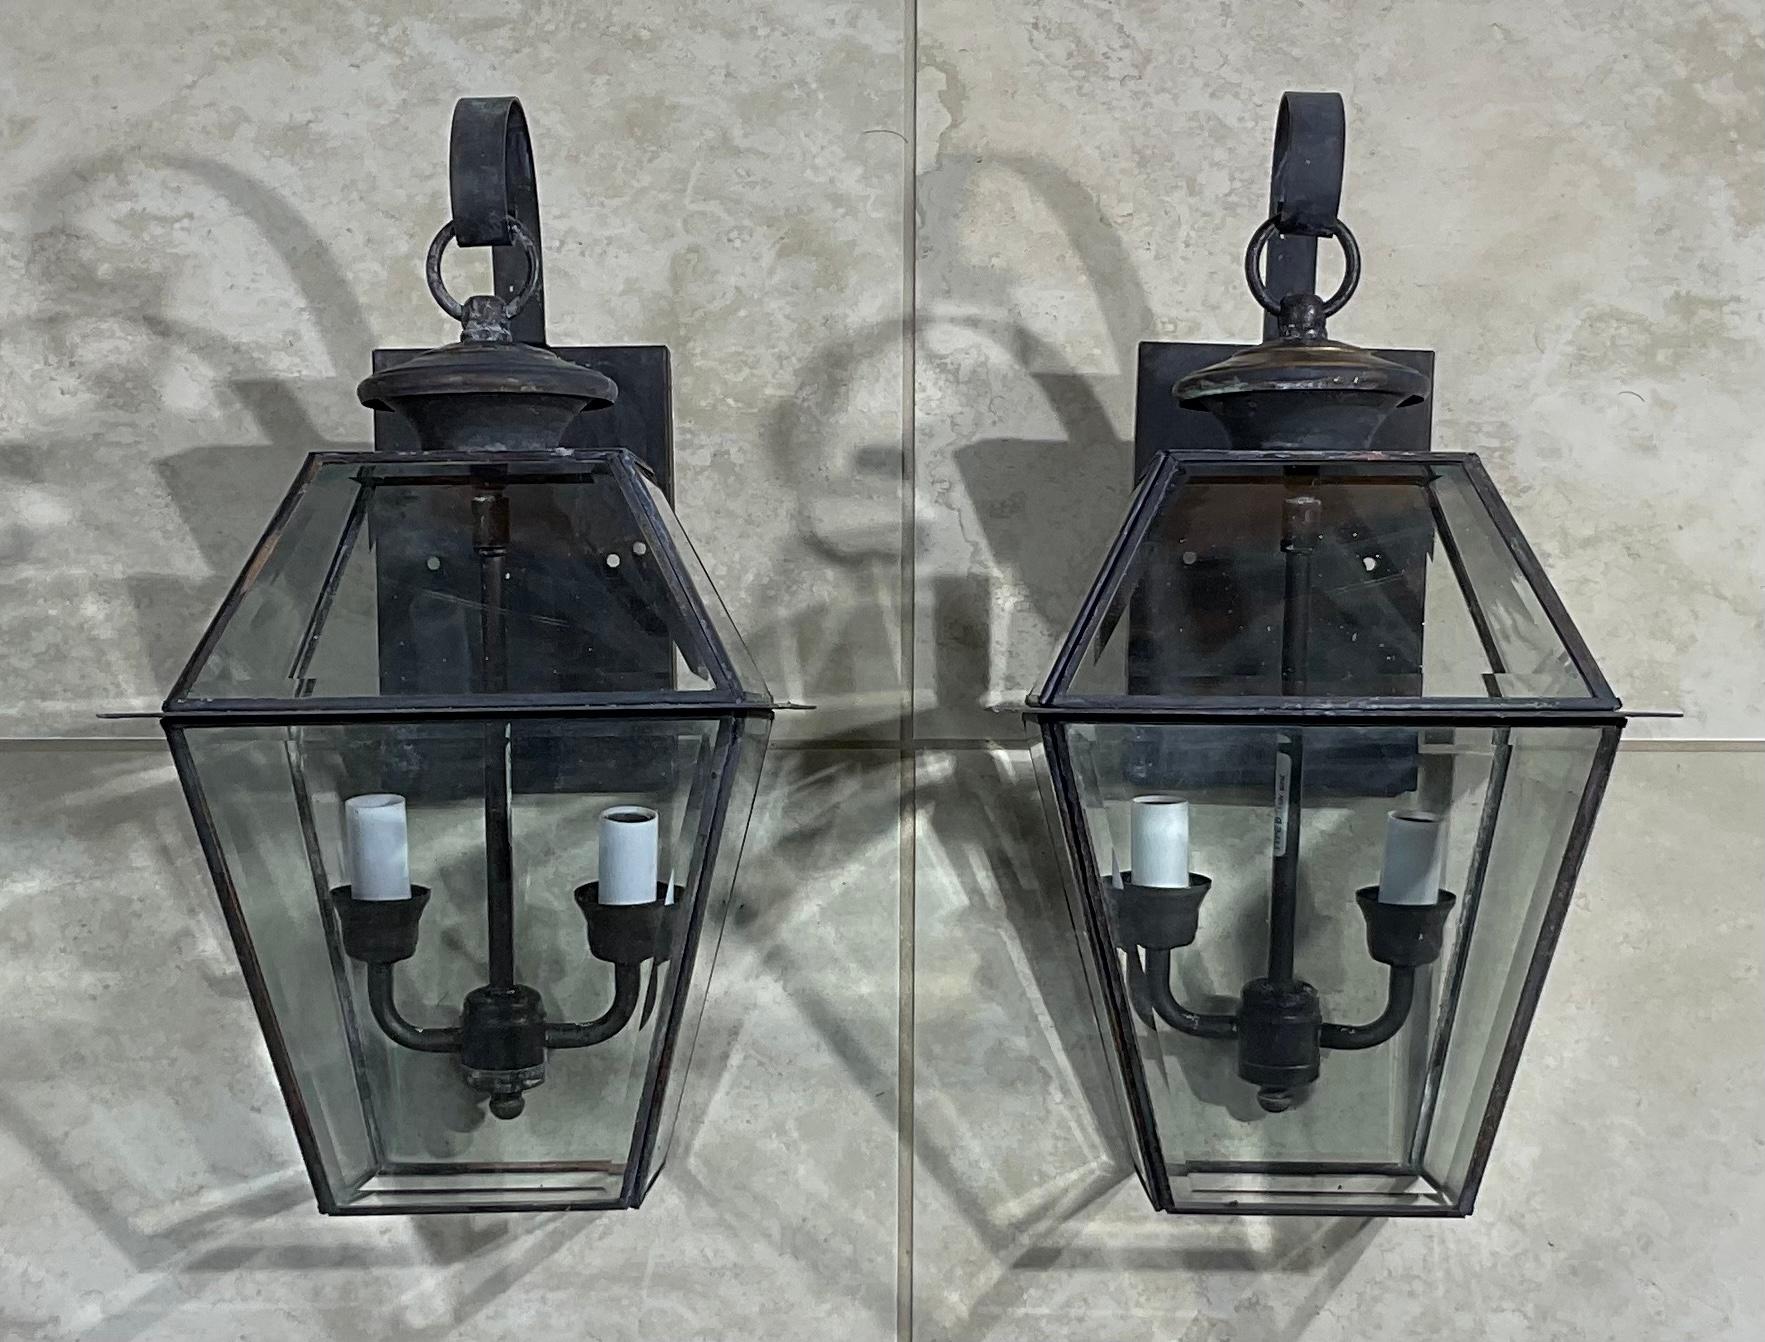 Elegant pair of wall lanterns made of brass, and thick decorative bevelled glass, electrified with brass cluster 0f two 60/watt lights each lantern. 
Suitable for wet location / or will be great looking light indoor as wall sconces.